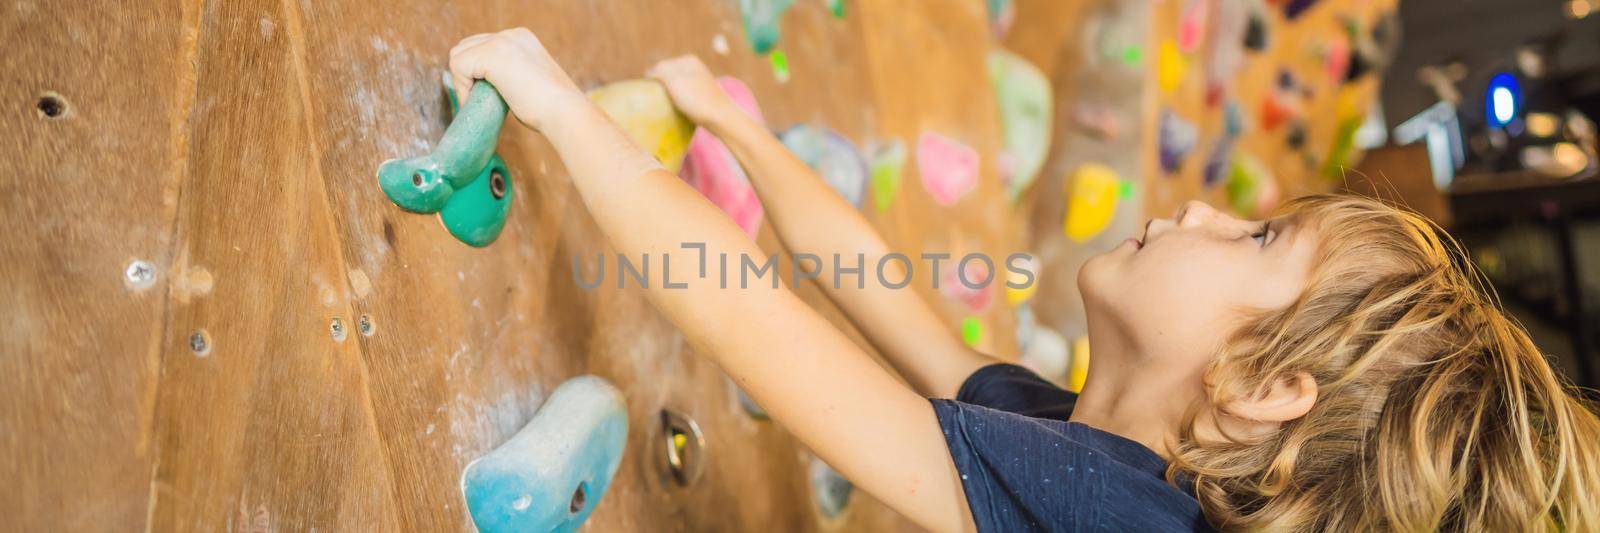 little boy climbing a rock wall in special boots. indoor BANNER, LONG FORMAT by galitskaya